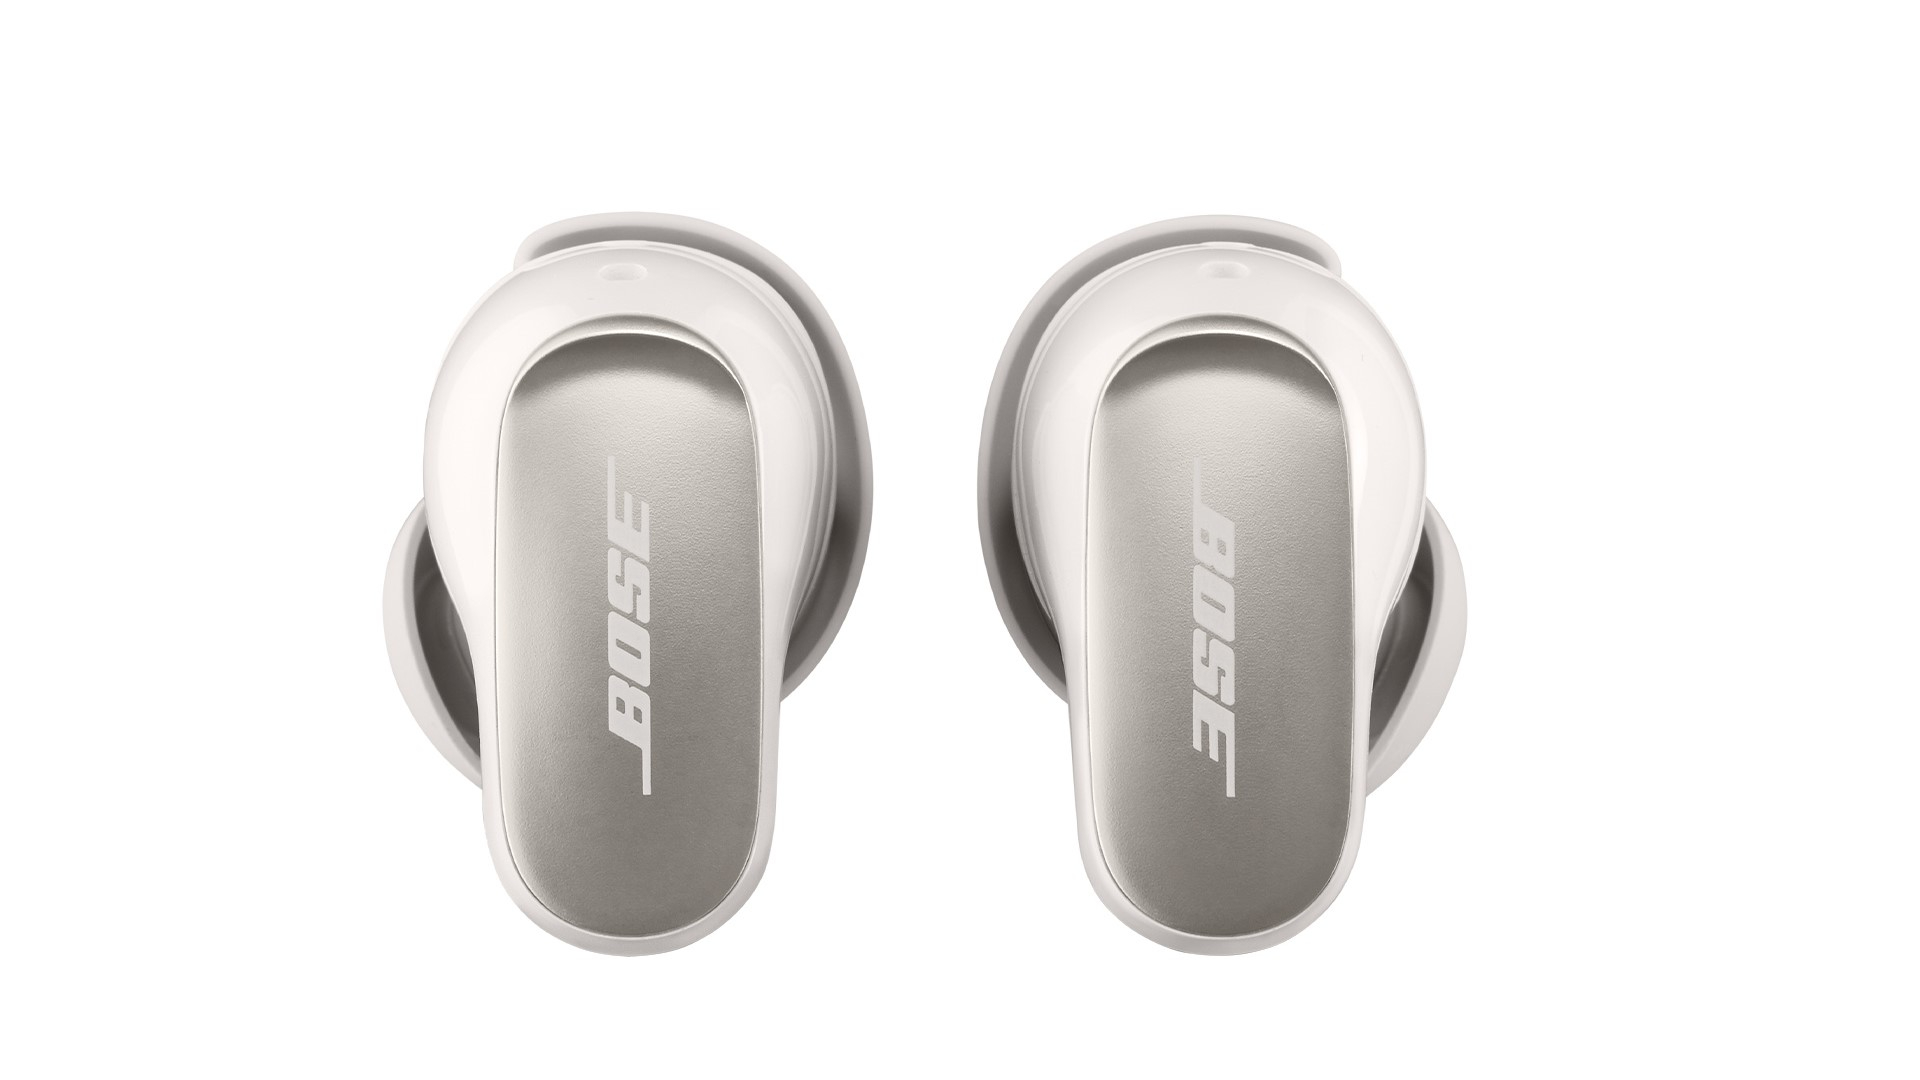 Bose QuietComfort Ultra Earbuds vs Sony WF-1000XM5: what are the differences?